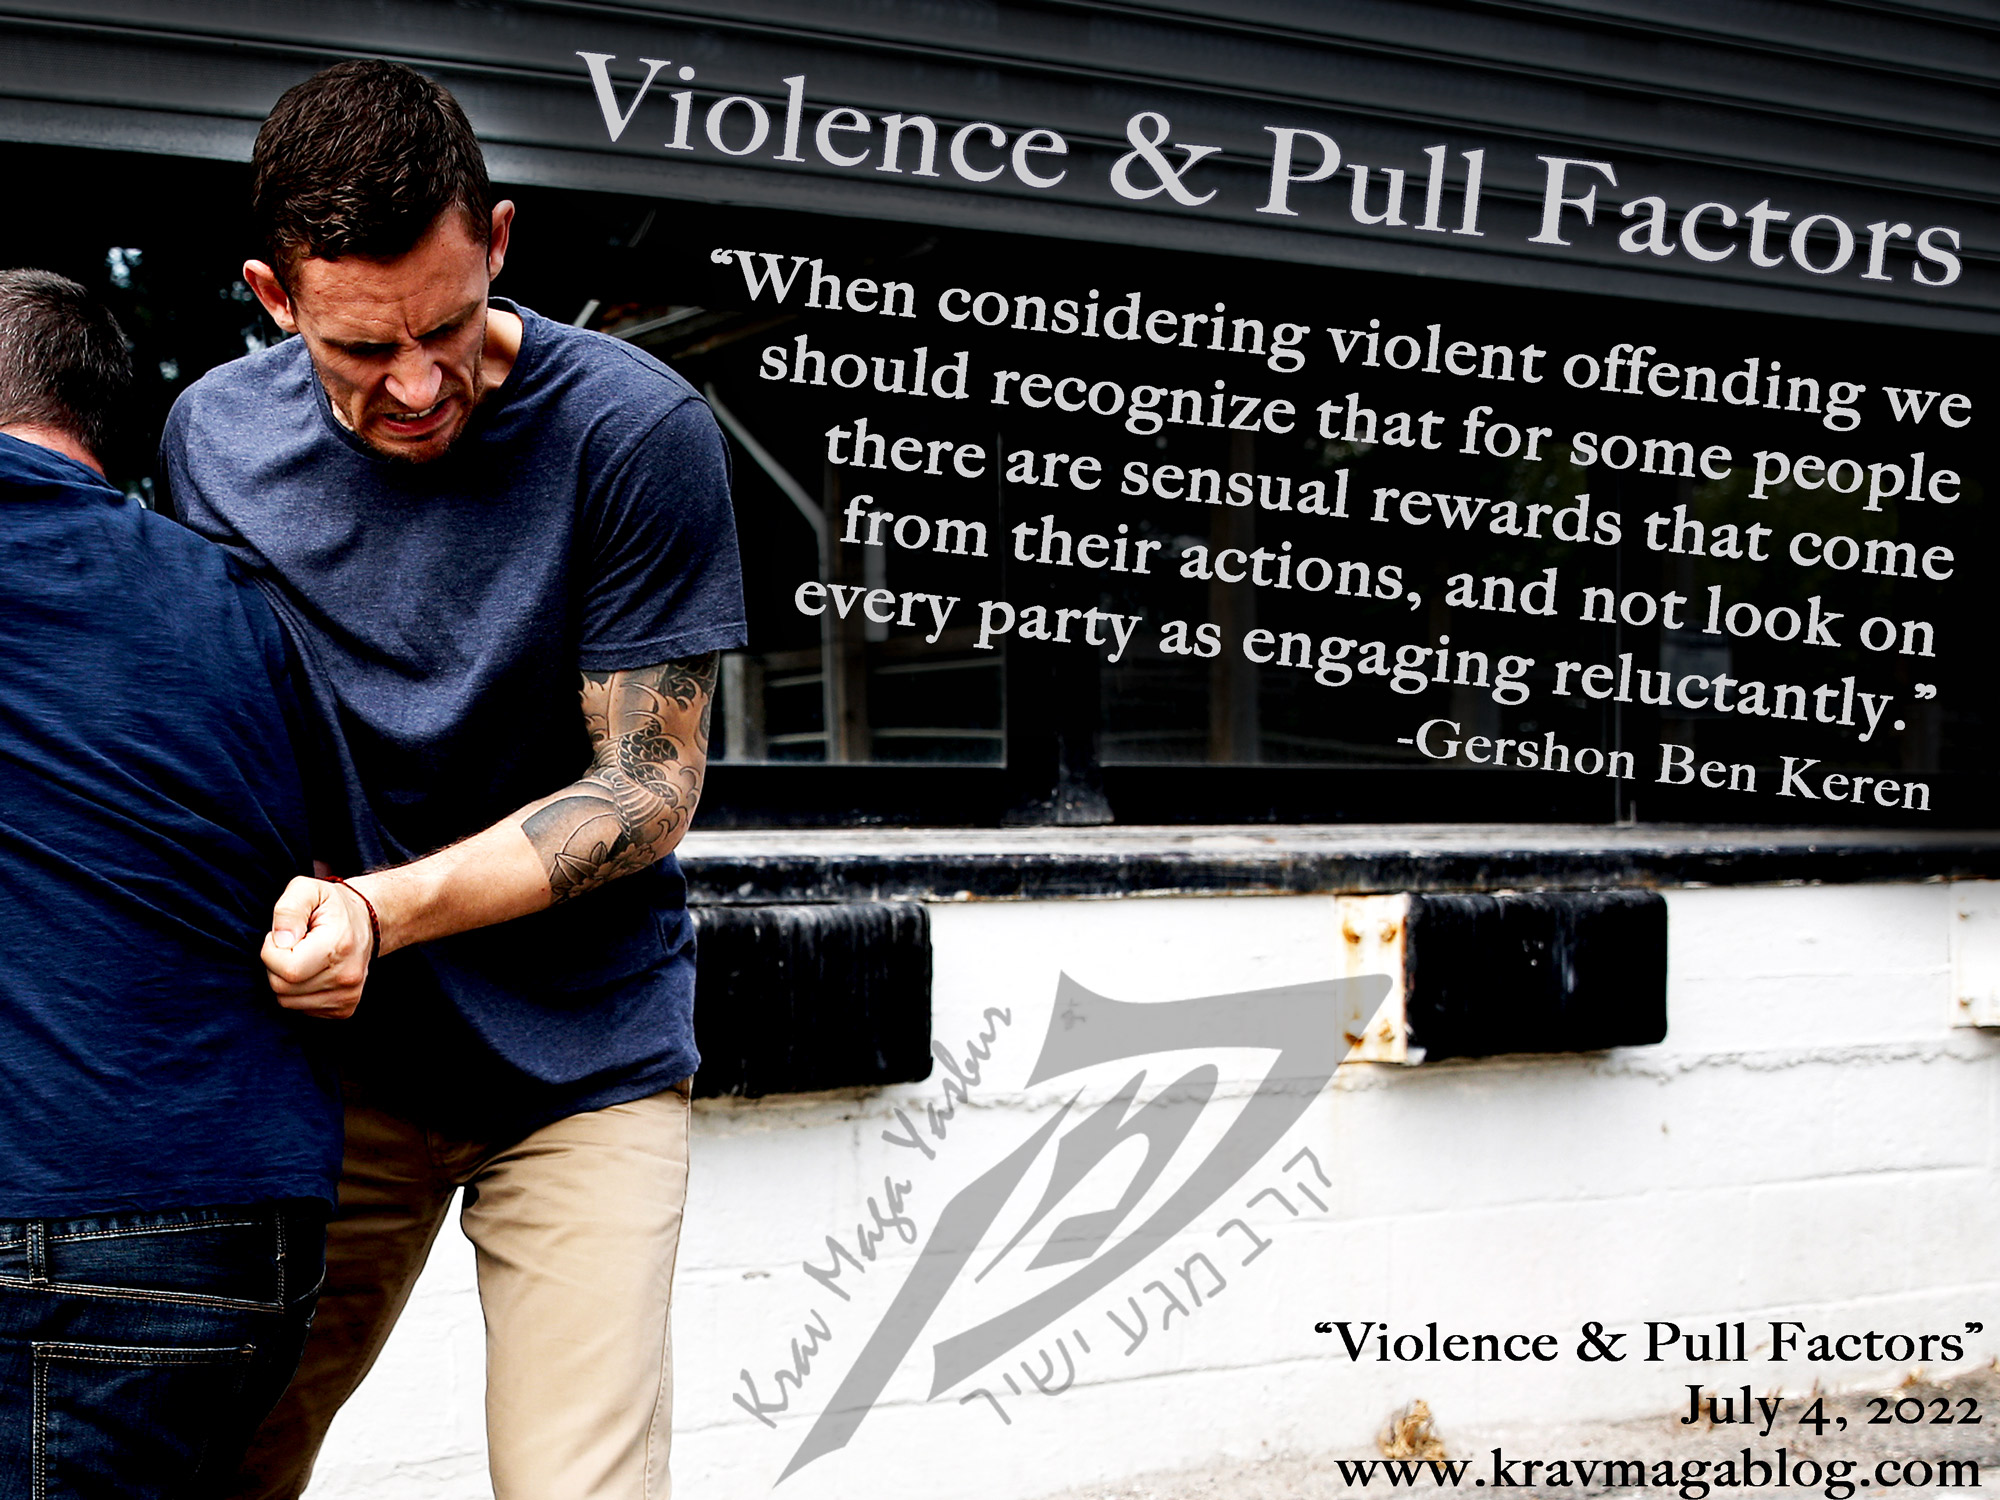 Blog About Violence & Pull Factors